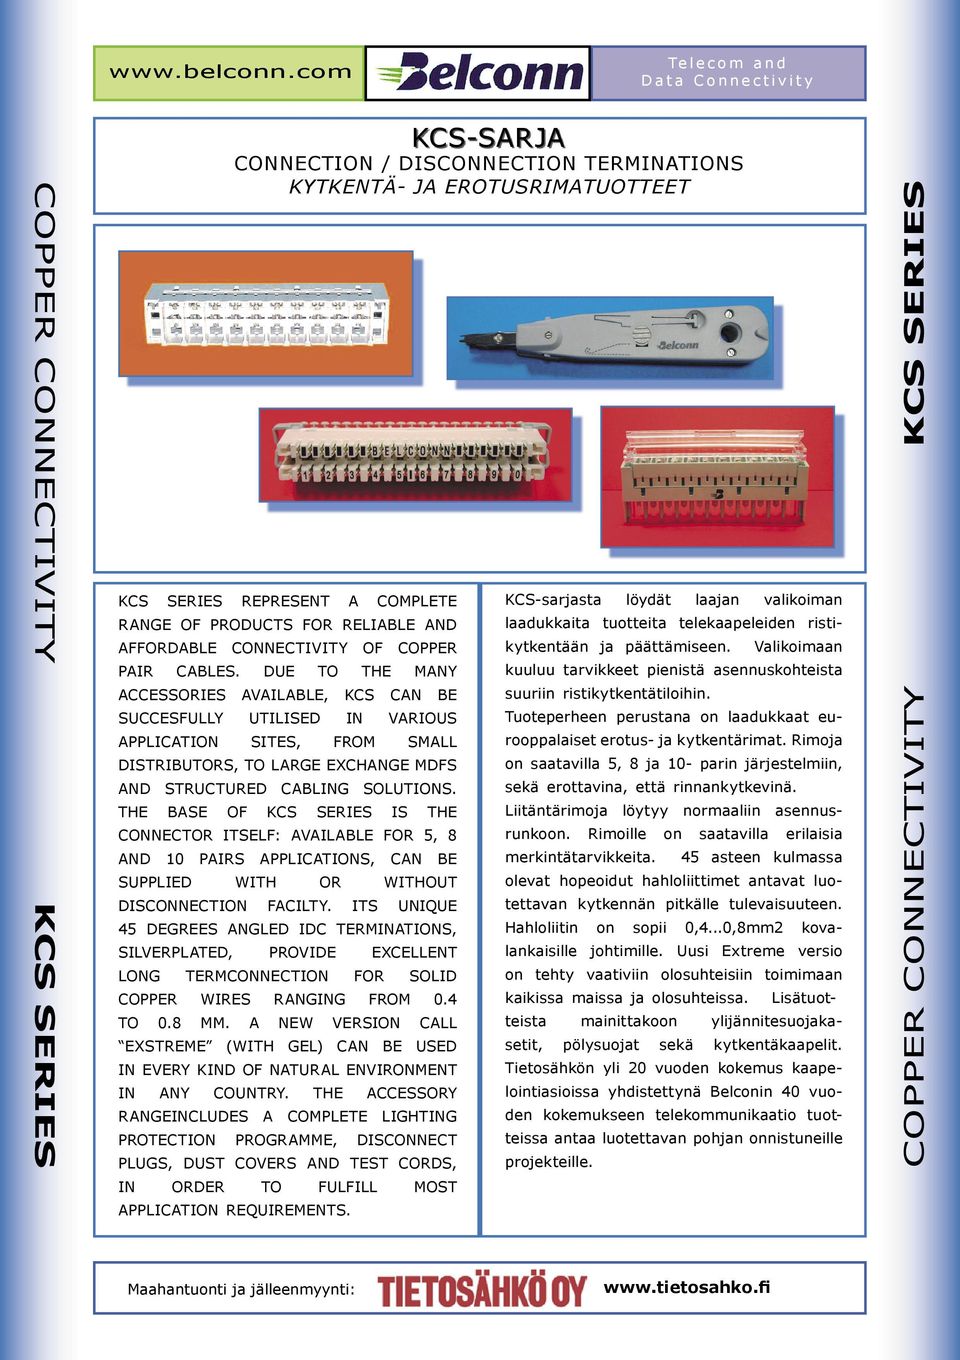 THE BASE OF KCS SERIES IS THE CONNECTOR ITSELF: AVAILABLE FOR 5, 8 AND 10 PAIRS APPLICATIONS, CAN BE SUPPLIED WITH OR WITHOUT DISCONNECTION FACILTY.